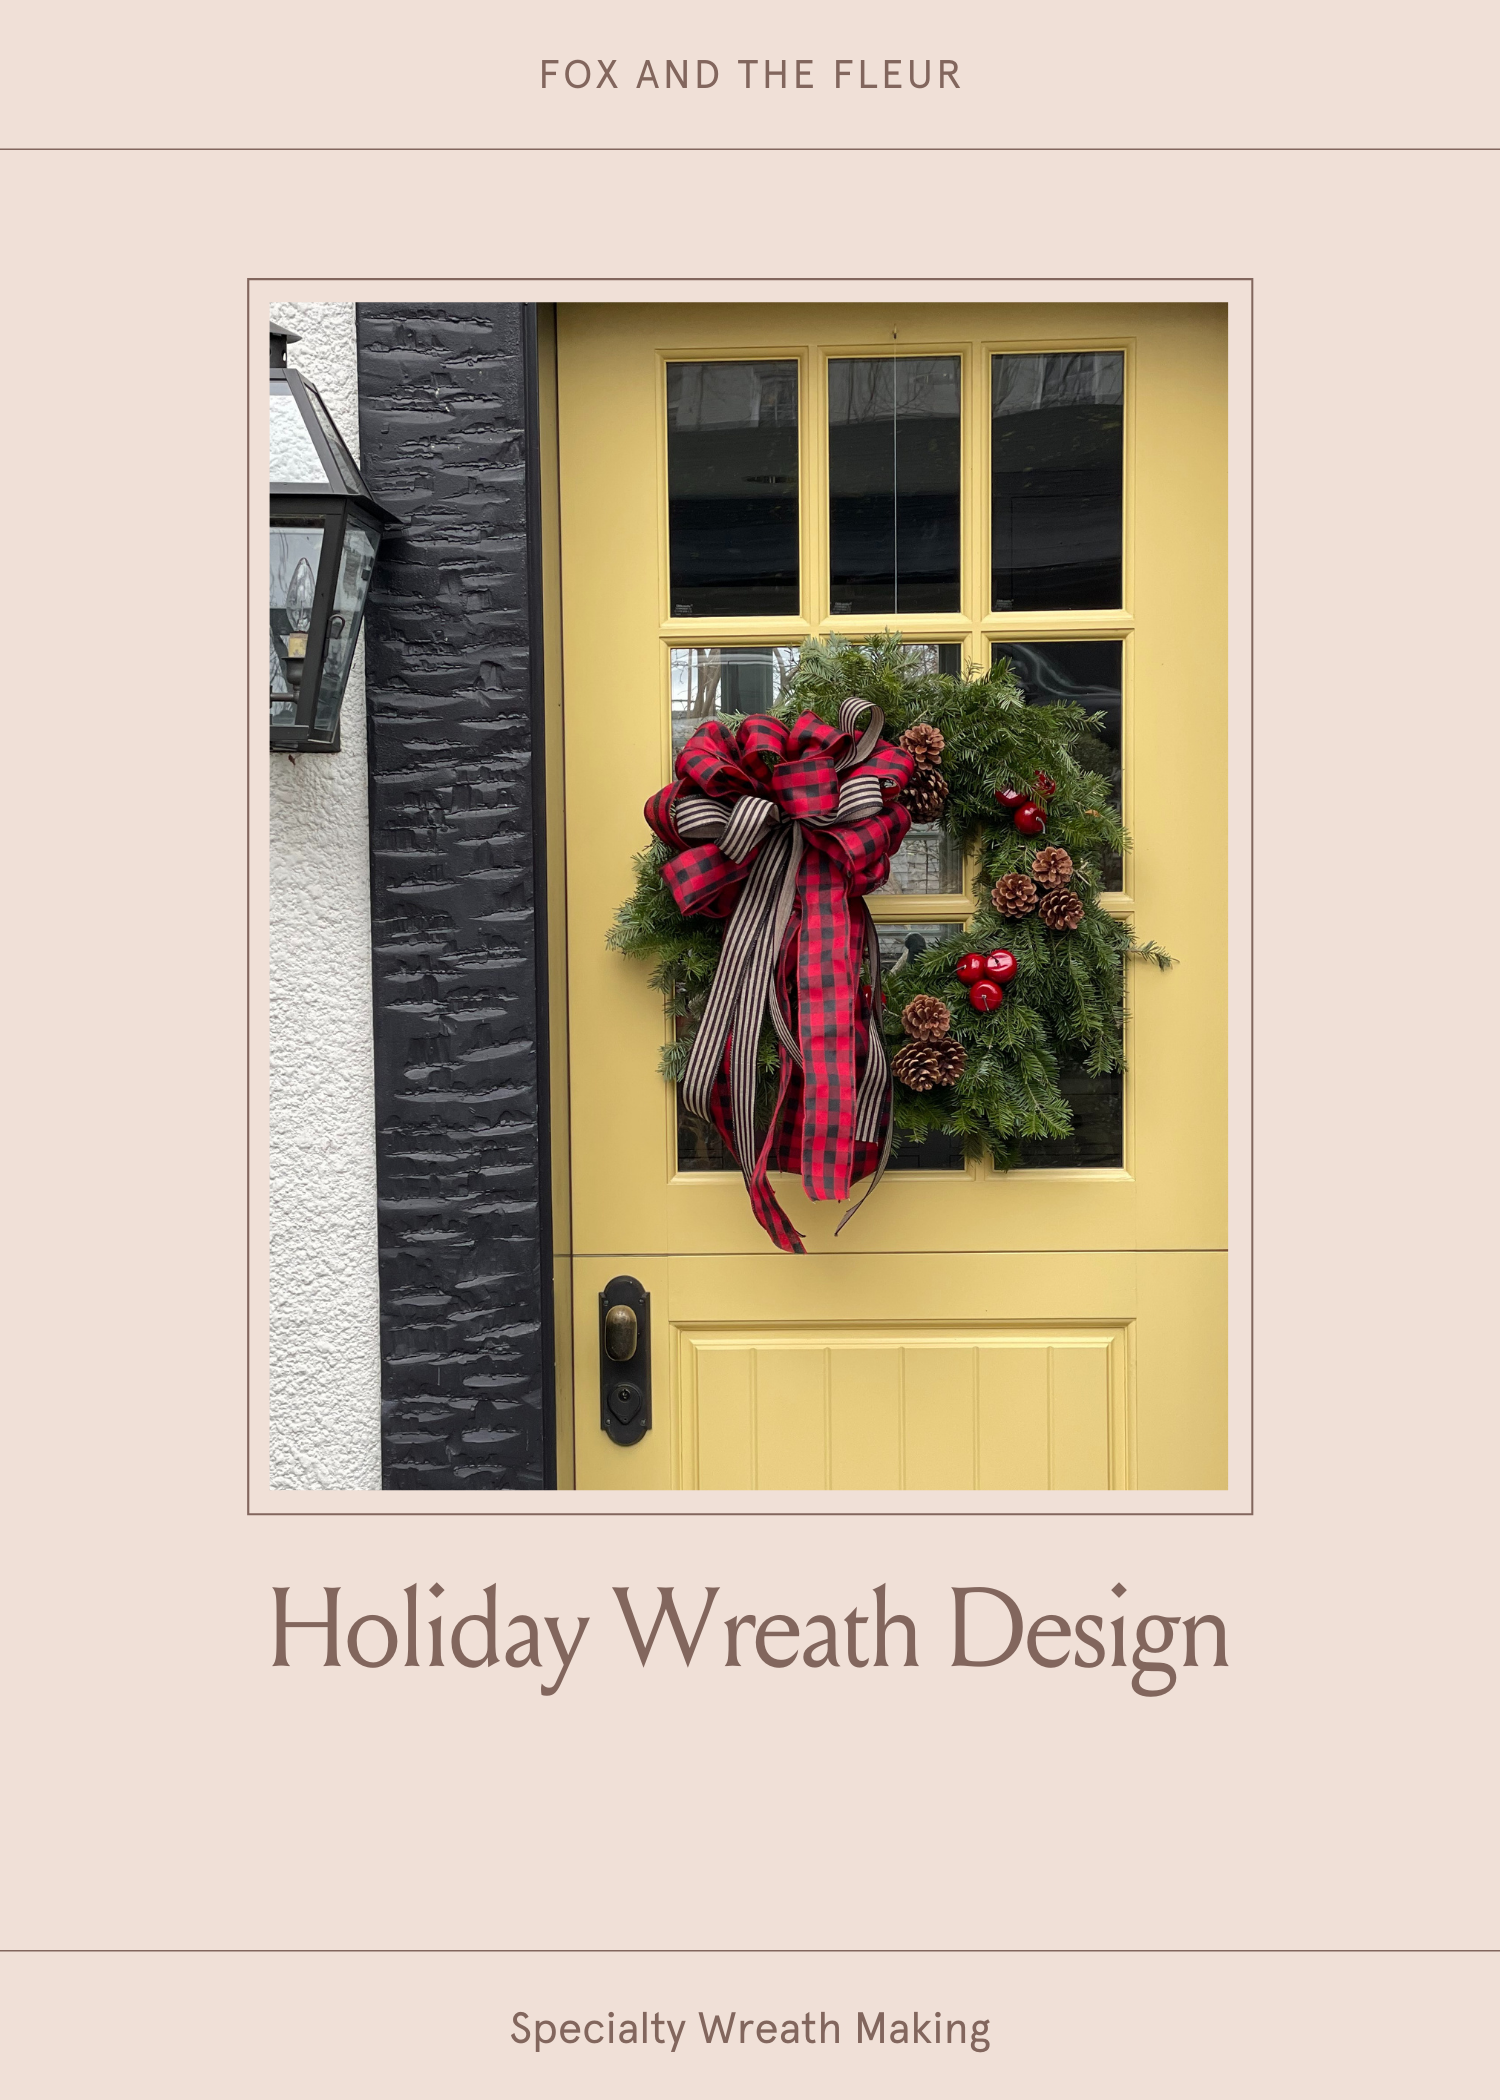 Holiday Wreath Design: Speciality Wreath Making